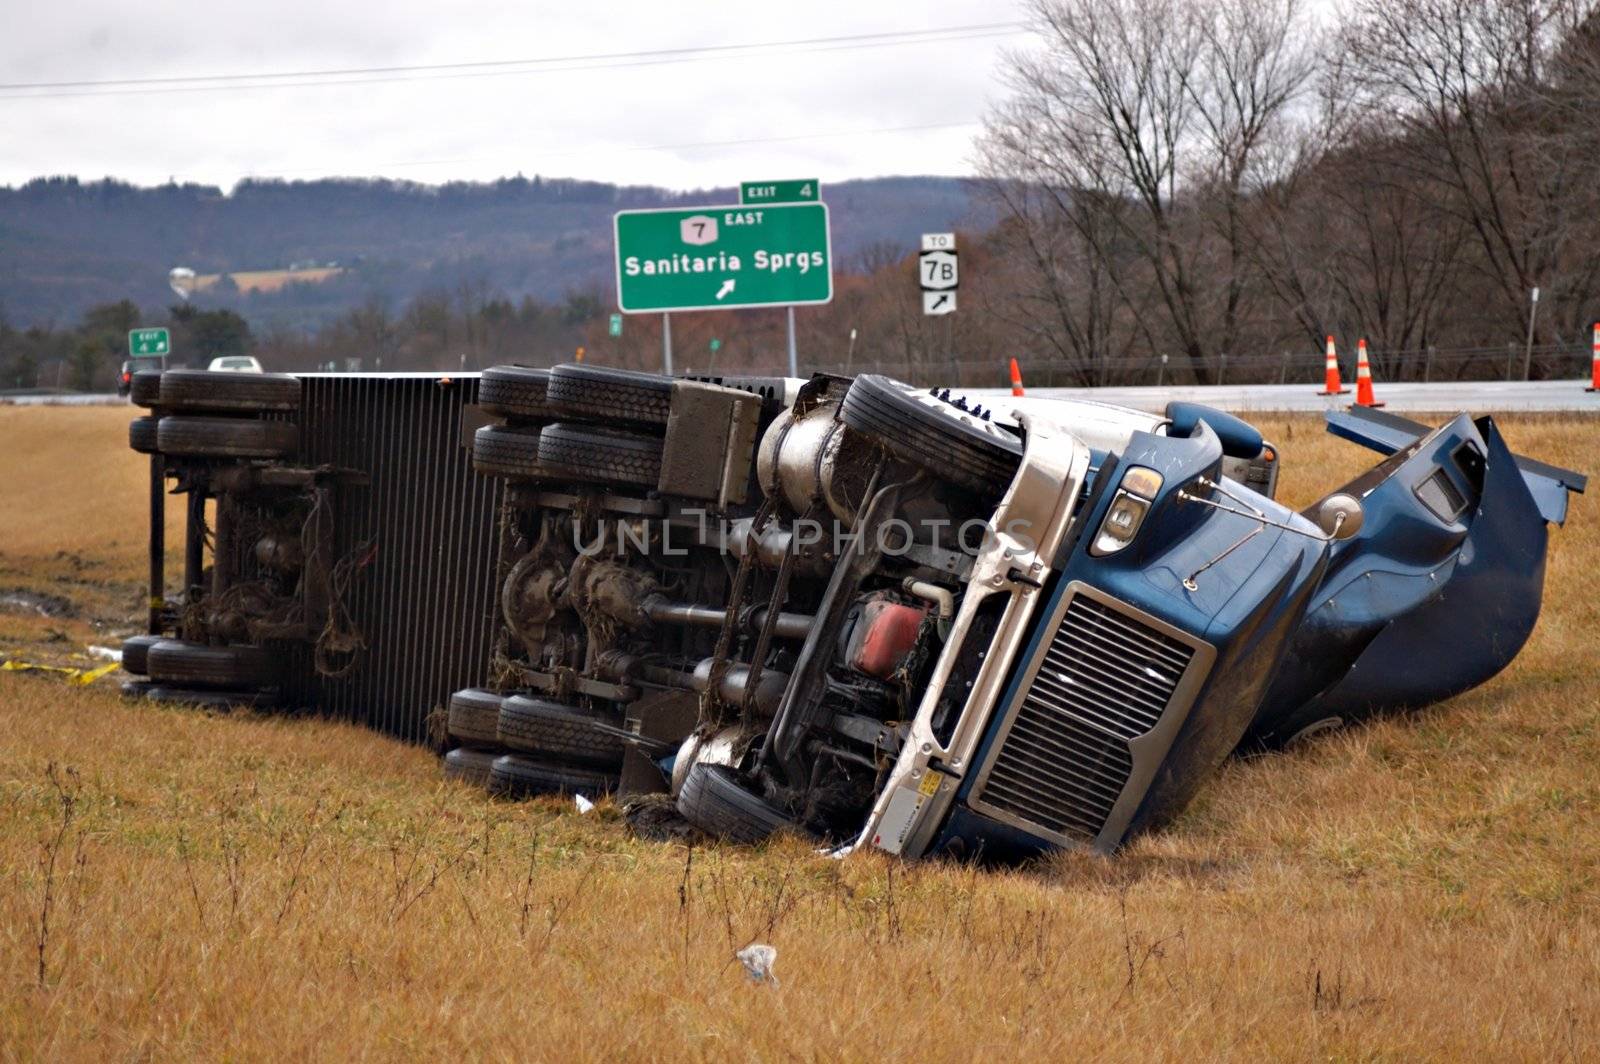 A tractor trailer on its side in the median after a roll over accident. 